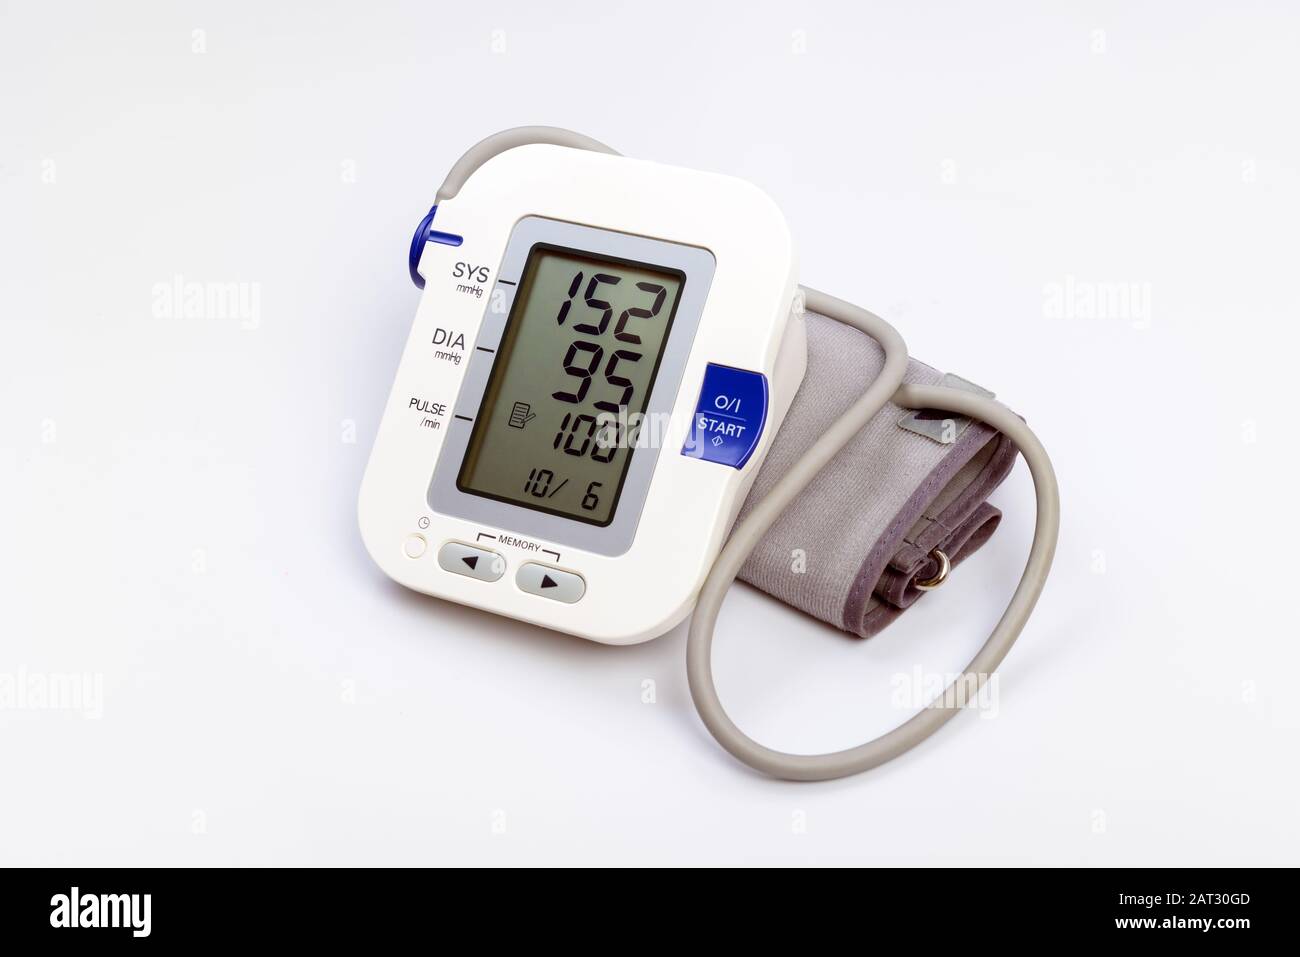 Electronic blood pressure meter monitor and cuff on white background Stock Photo